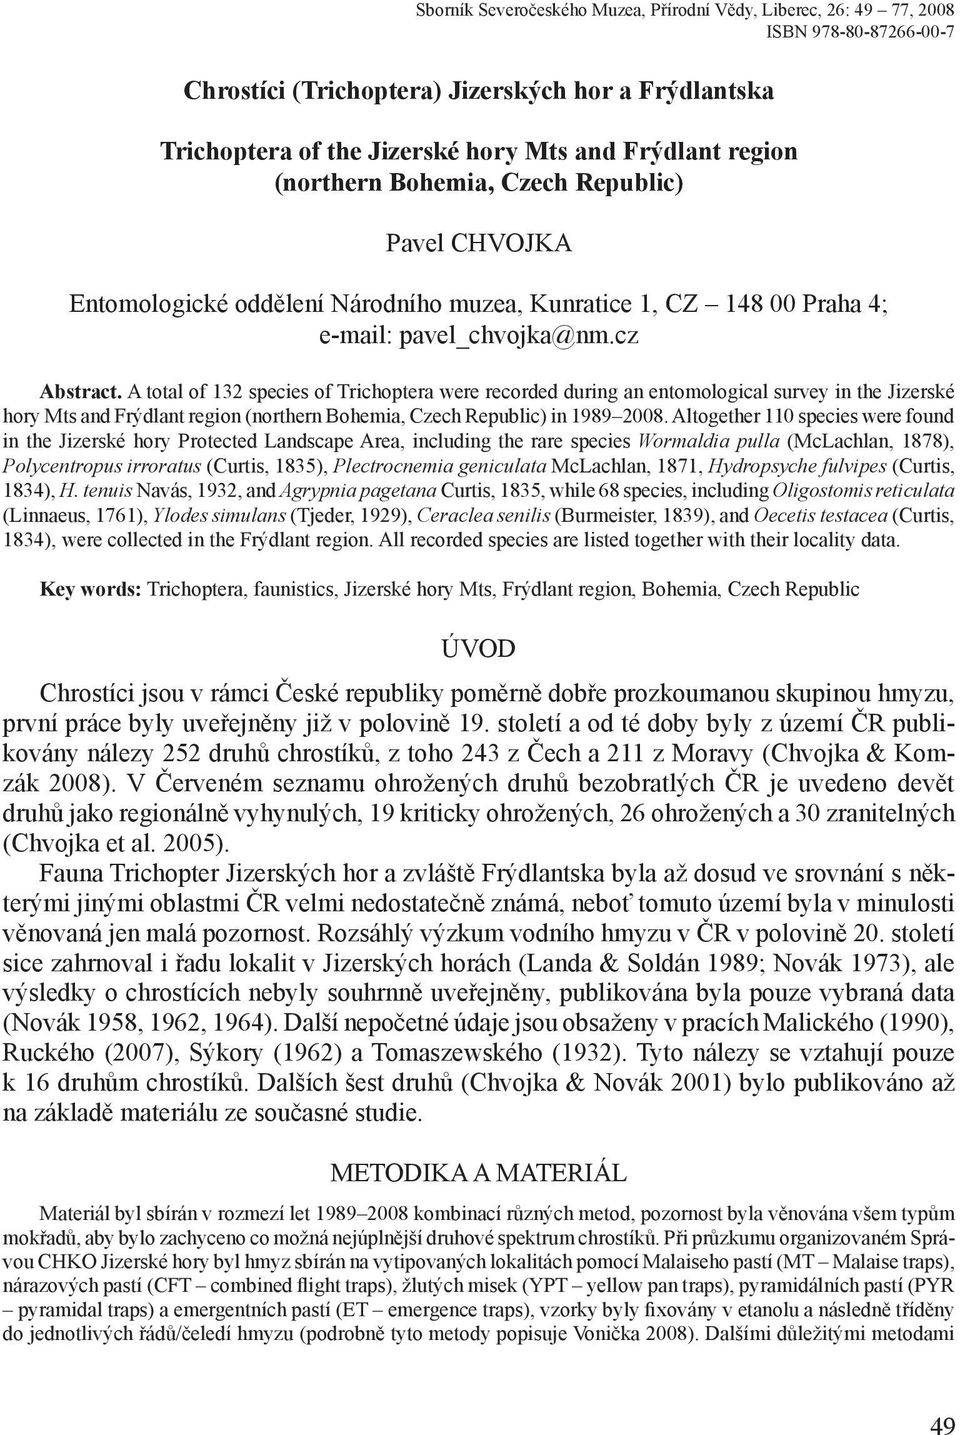 A total of 132 species of Trichoptera were recorded during an entomological survey in the Jizerské hory Mts and Frýdlant region (northern Bohemia, Czech Republic) in 1989 2008.